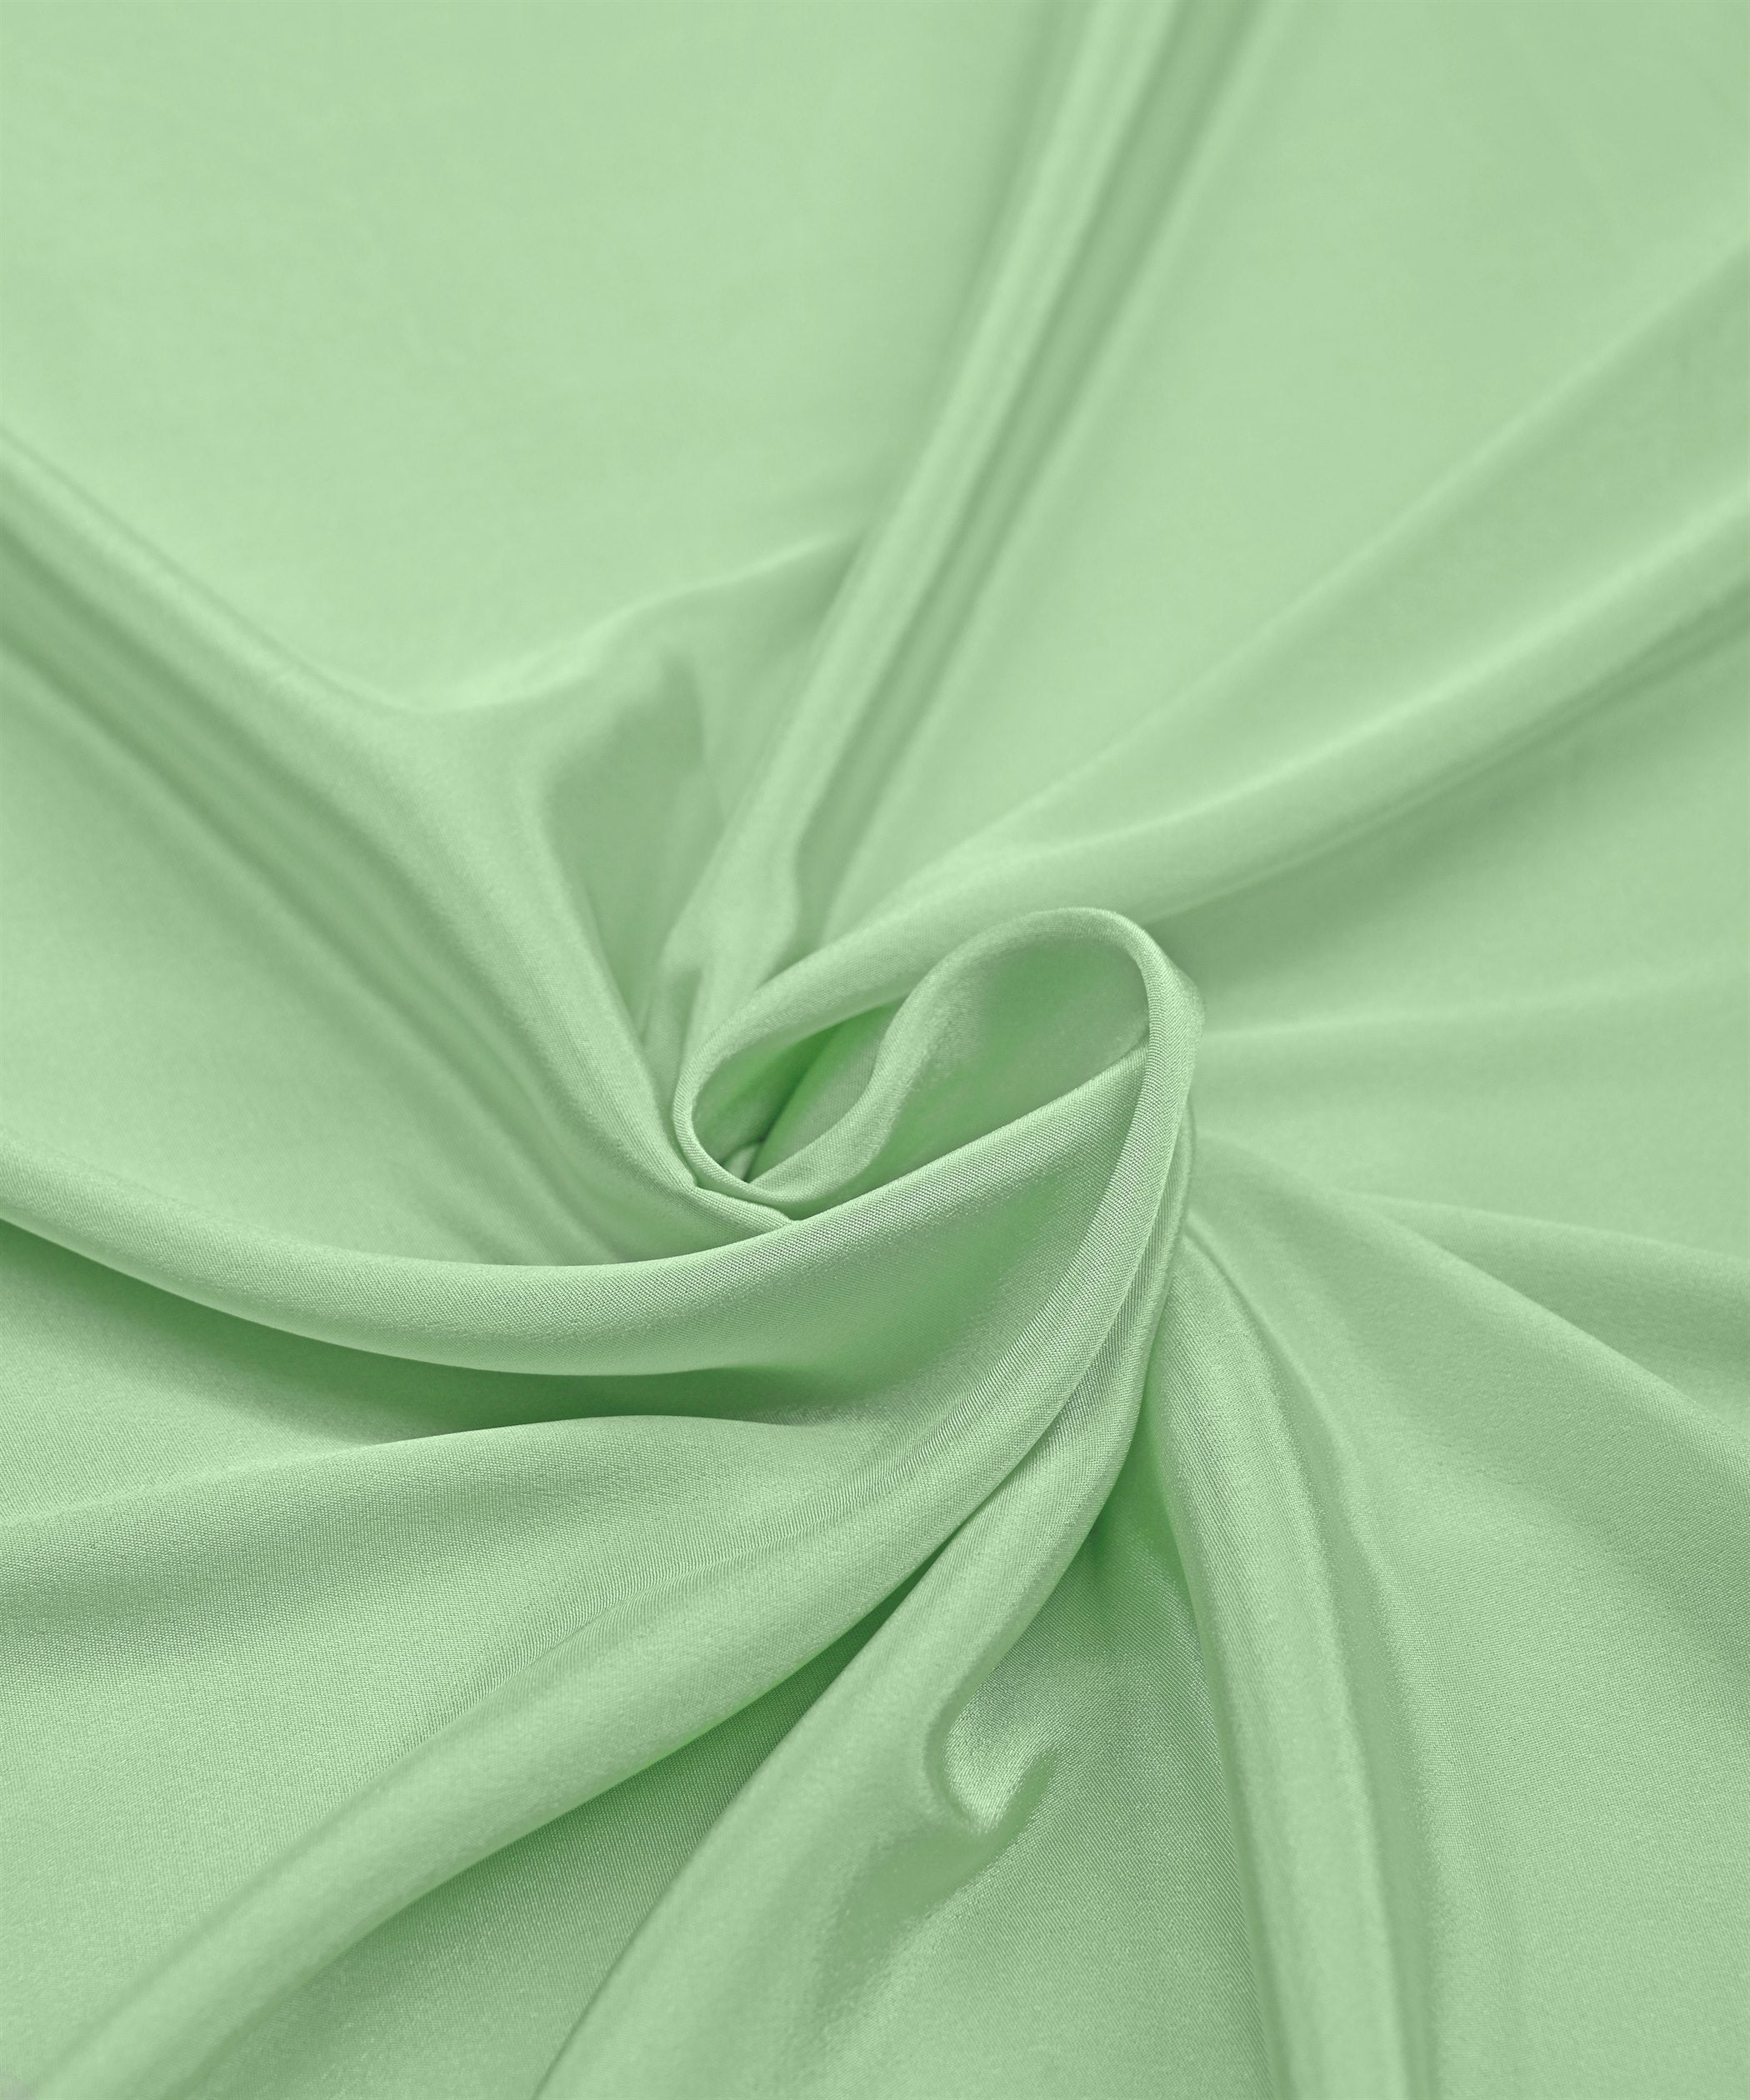 Buy Pista Green Plain Crepe Fabric Online At Wholesale Prices